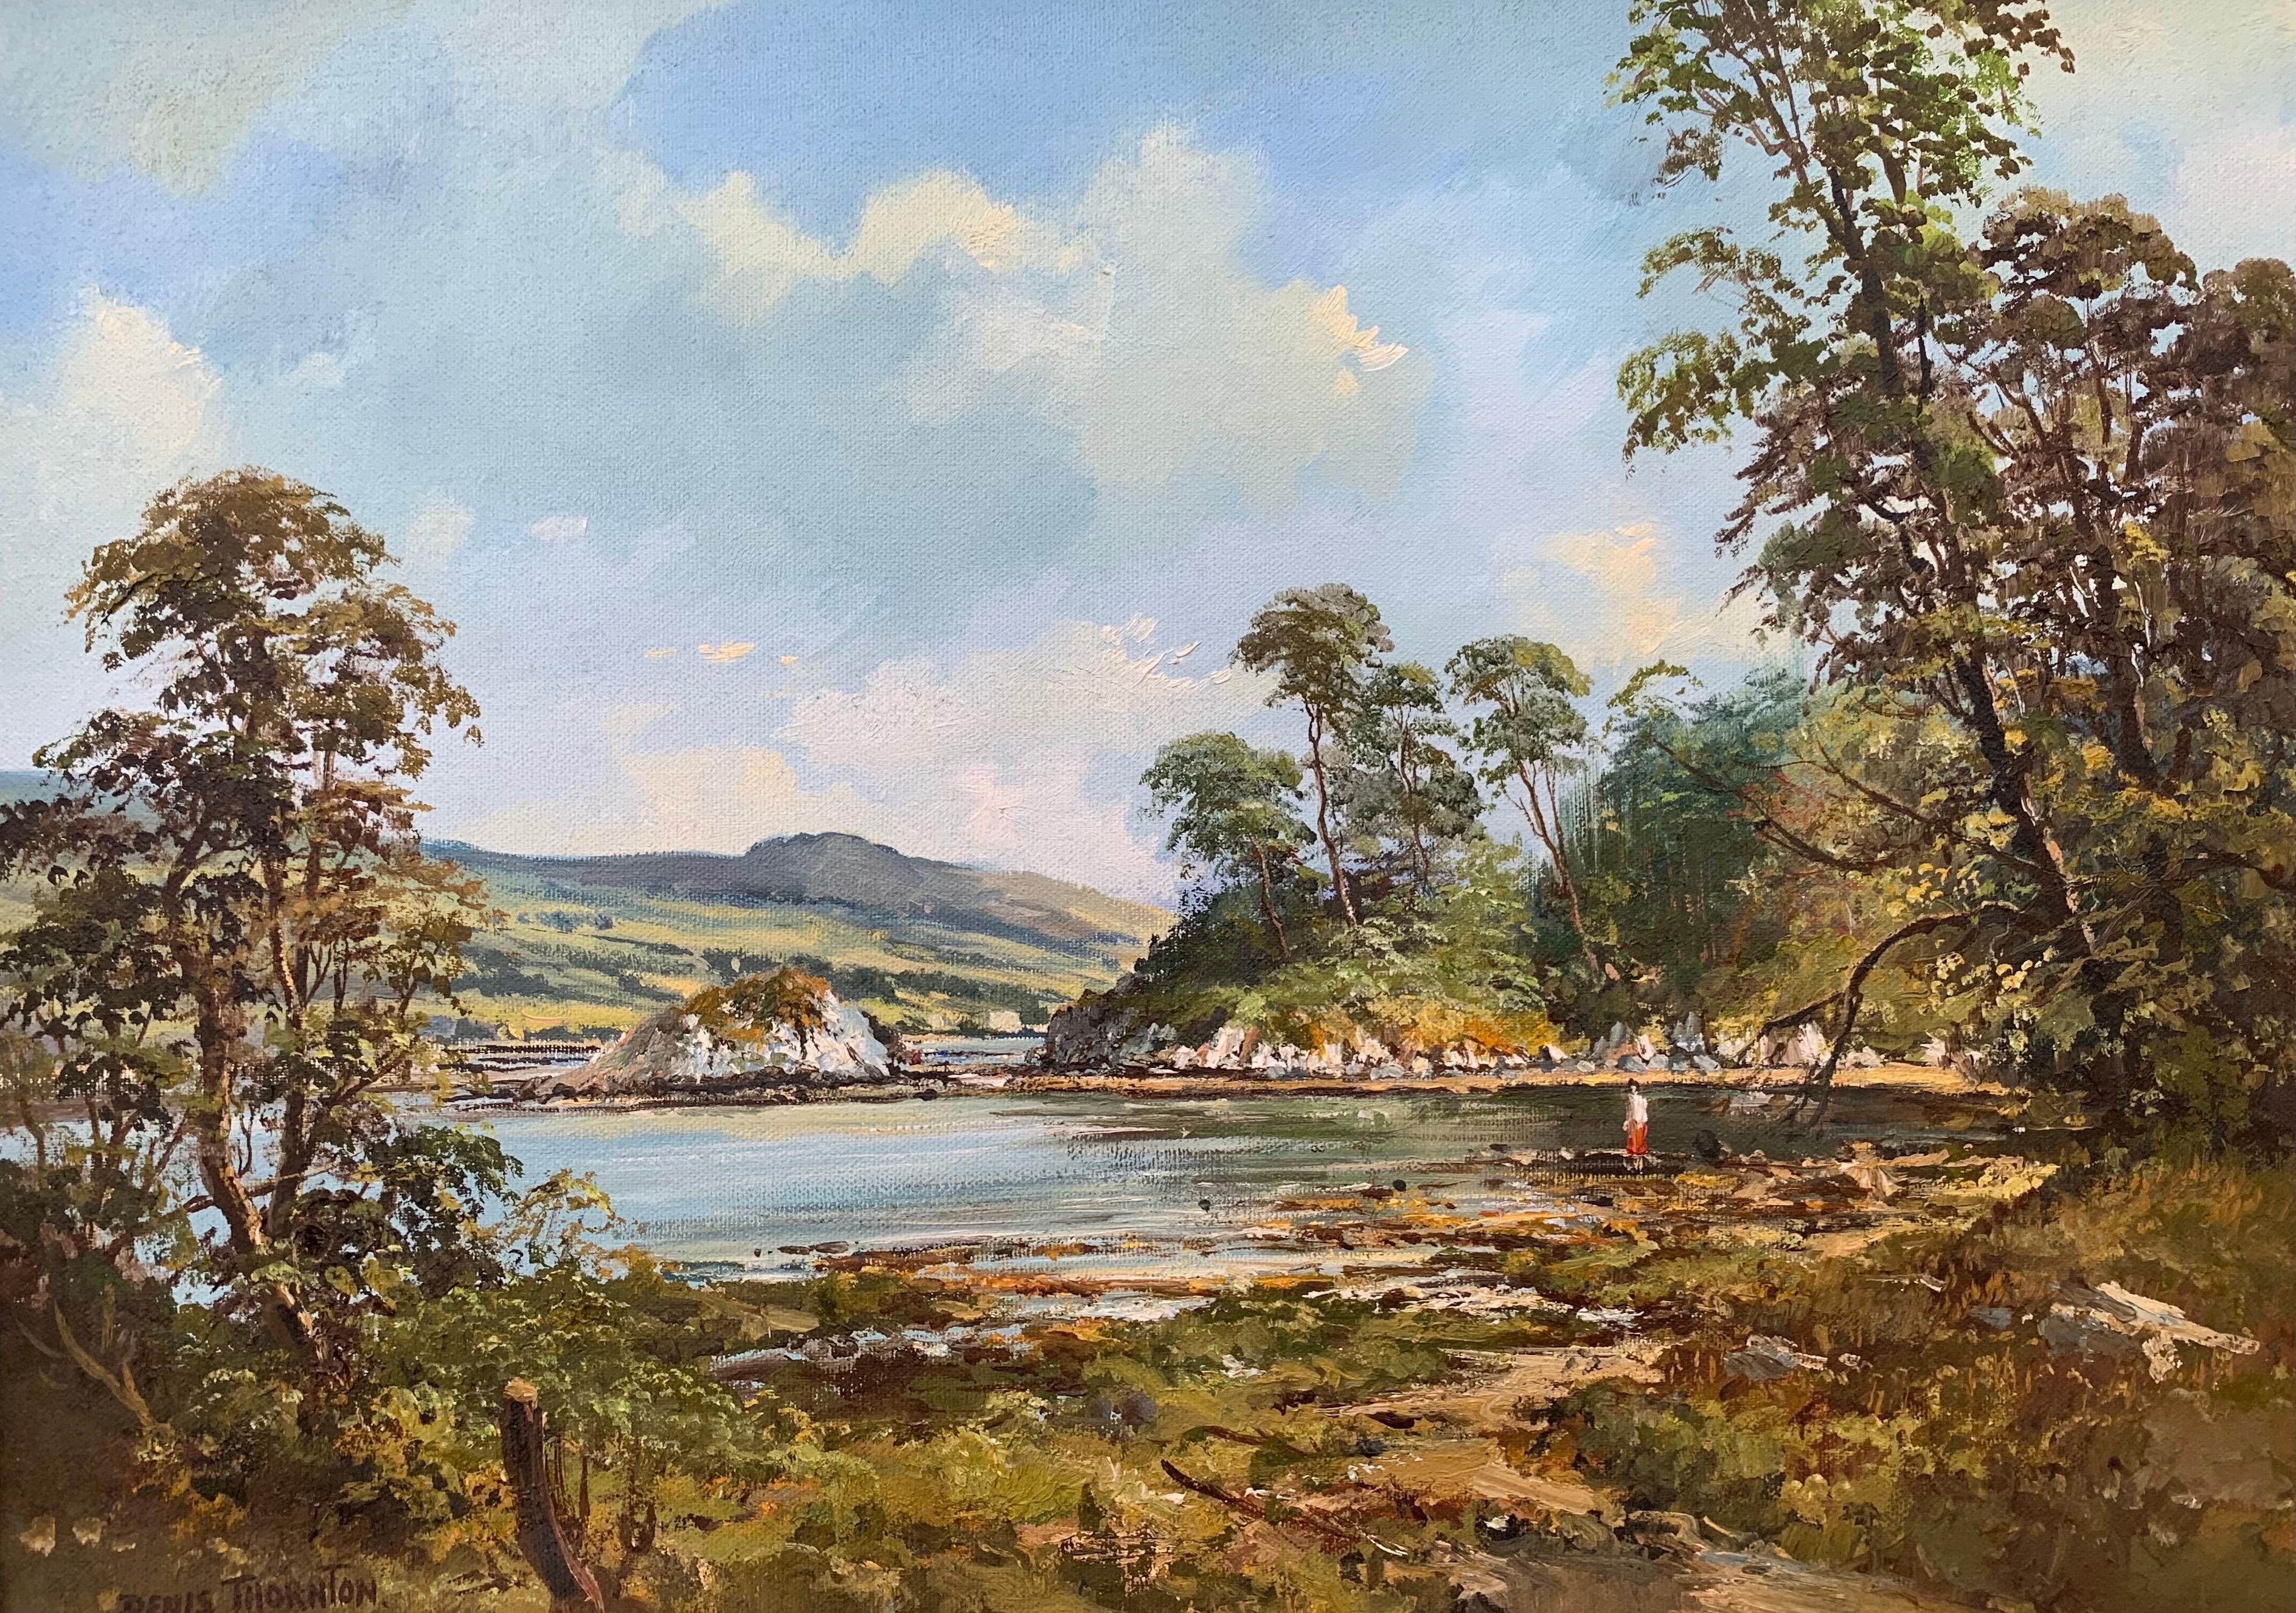 Original Post-War Oil Painting of Mulroy Bay Donegal Ireland by Irish Artist Denis Thornton (1937-1999)

Art measures 22 x 16 inches
Frame measures 27 x 21 inches 

Denis Thornton was a very talented Post-War & Contemporary Realist Oil Painter, and